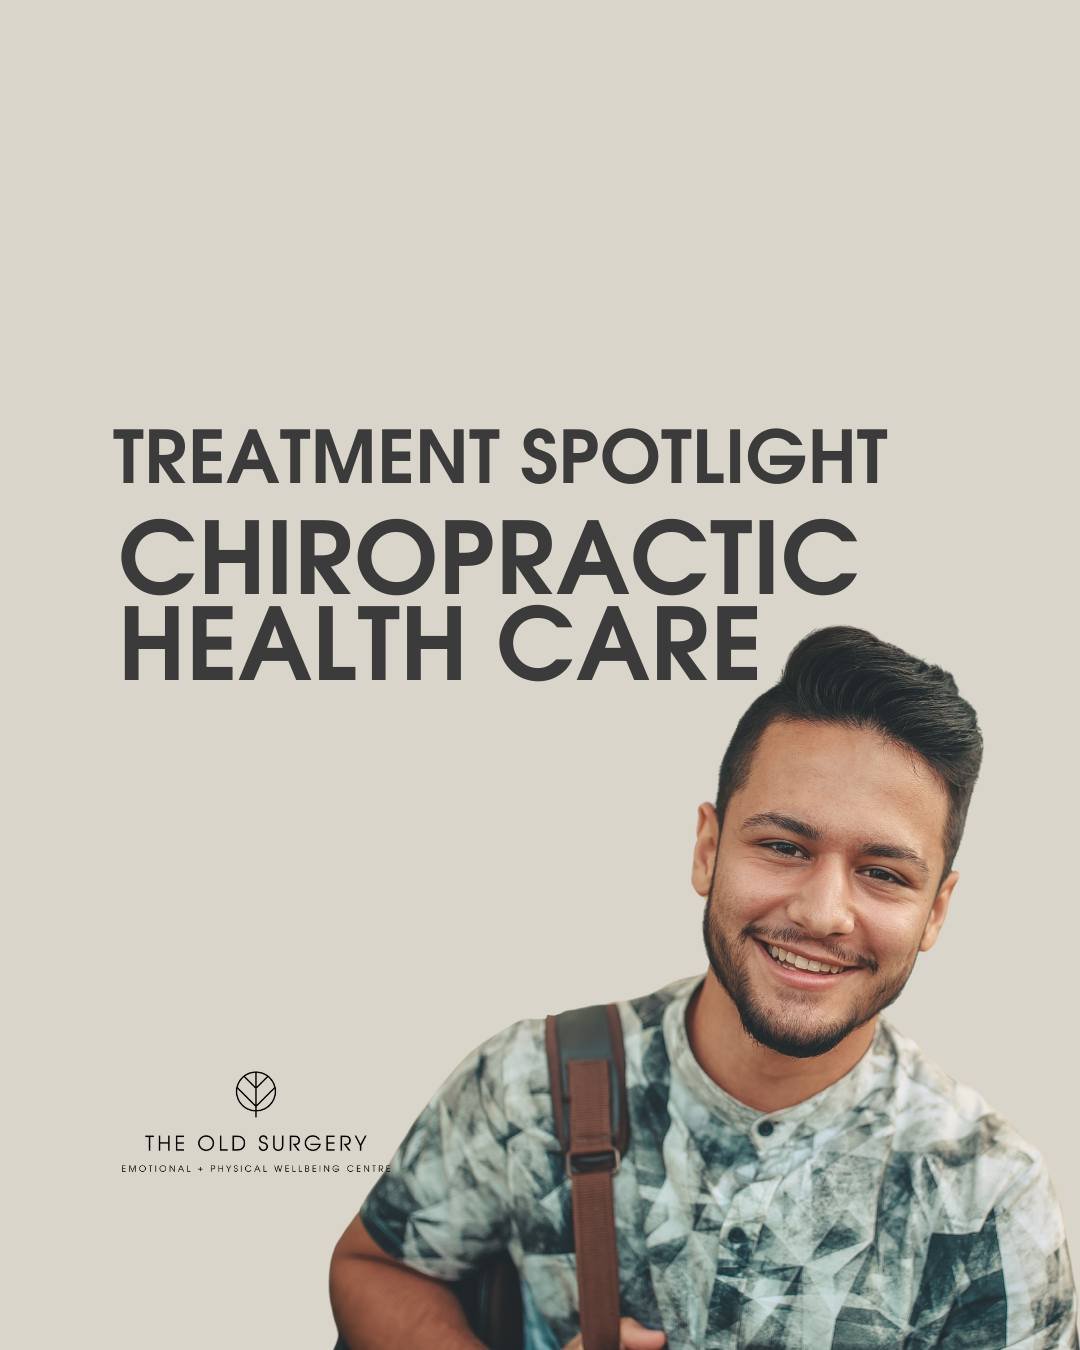 DM the word &quot;BOOK&quot; If you want to find out more about Chiropractic Healthcare with James @chiropractichealthcarederby 

To find out more about Our Room Hire and other treatments check out our website
www.theoldsurgeryderby.co.uk
#chiropract